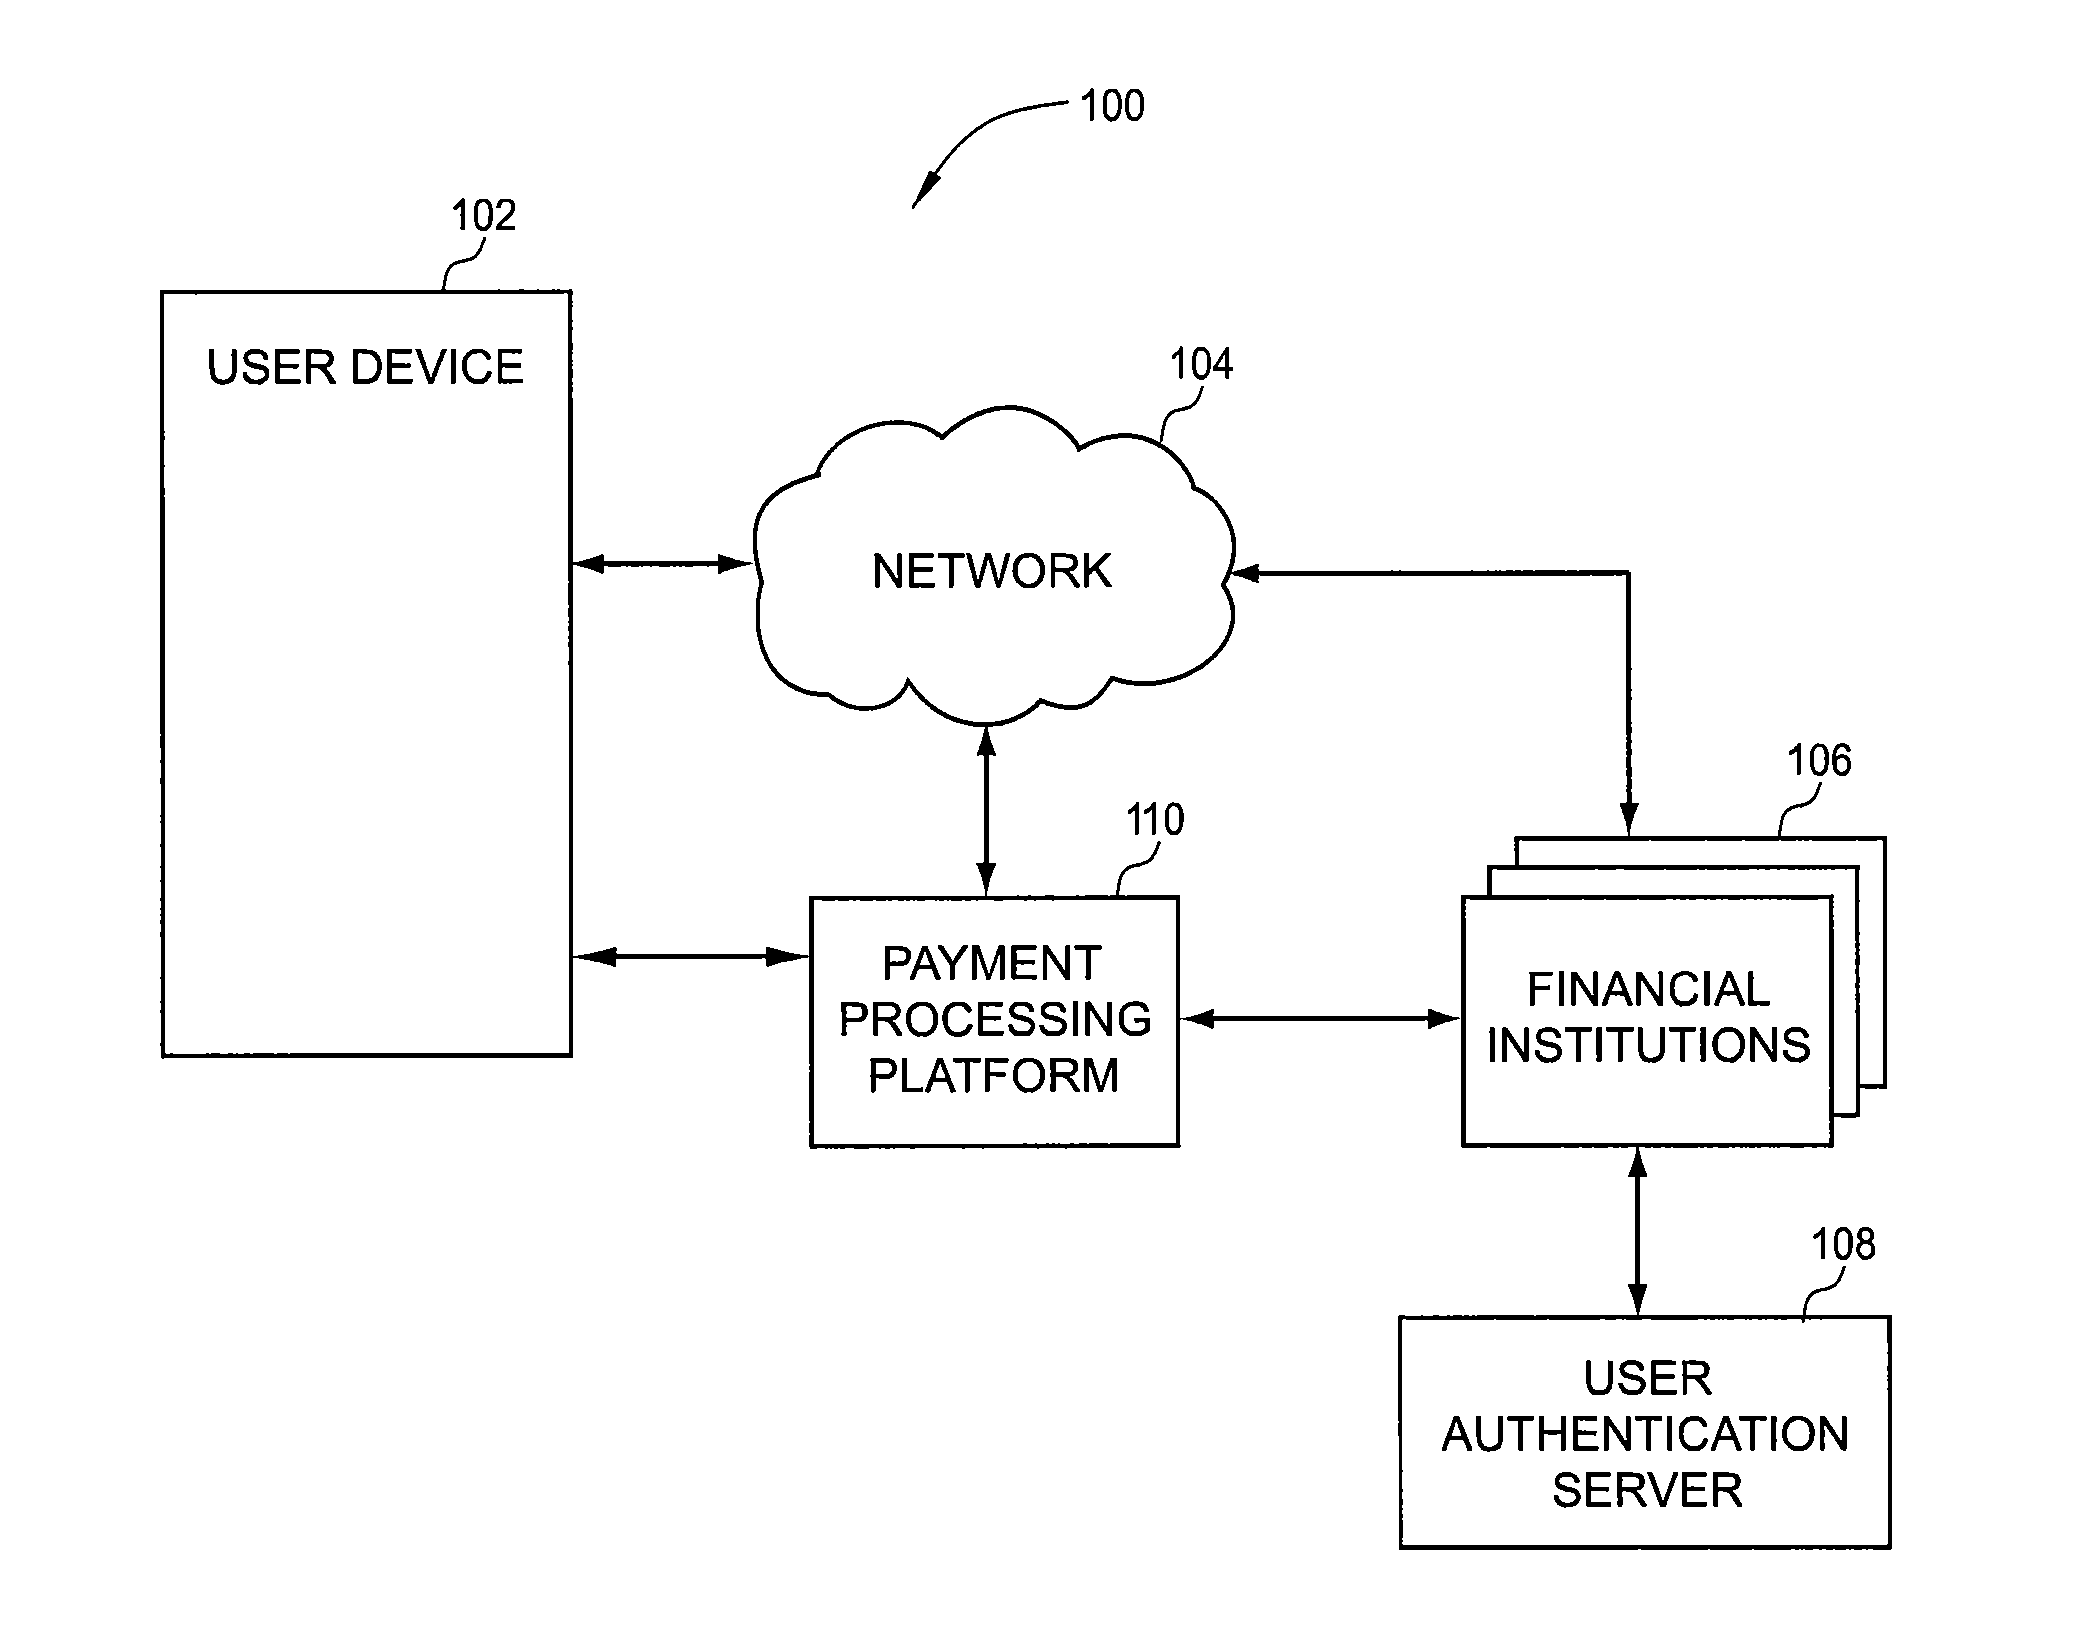 Apparatus and methods for payment transactions using near field communication